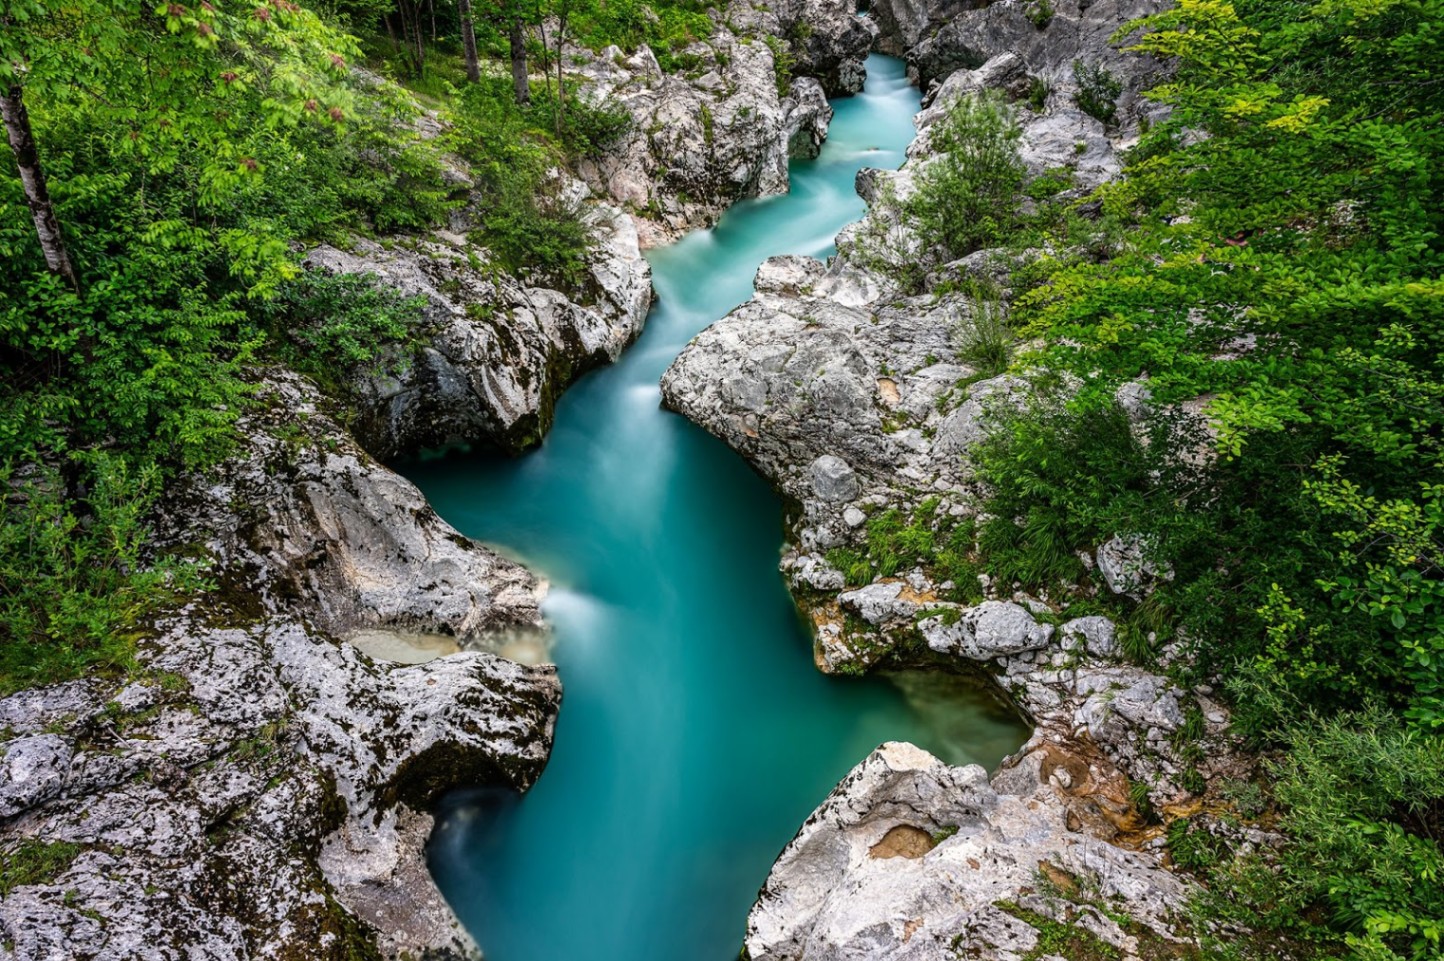 Why Slovenia Should Be On Every Nature Lover's Bucket List